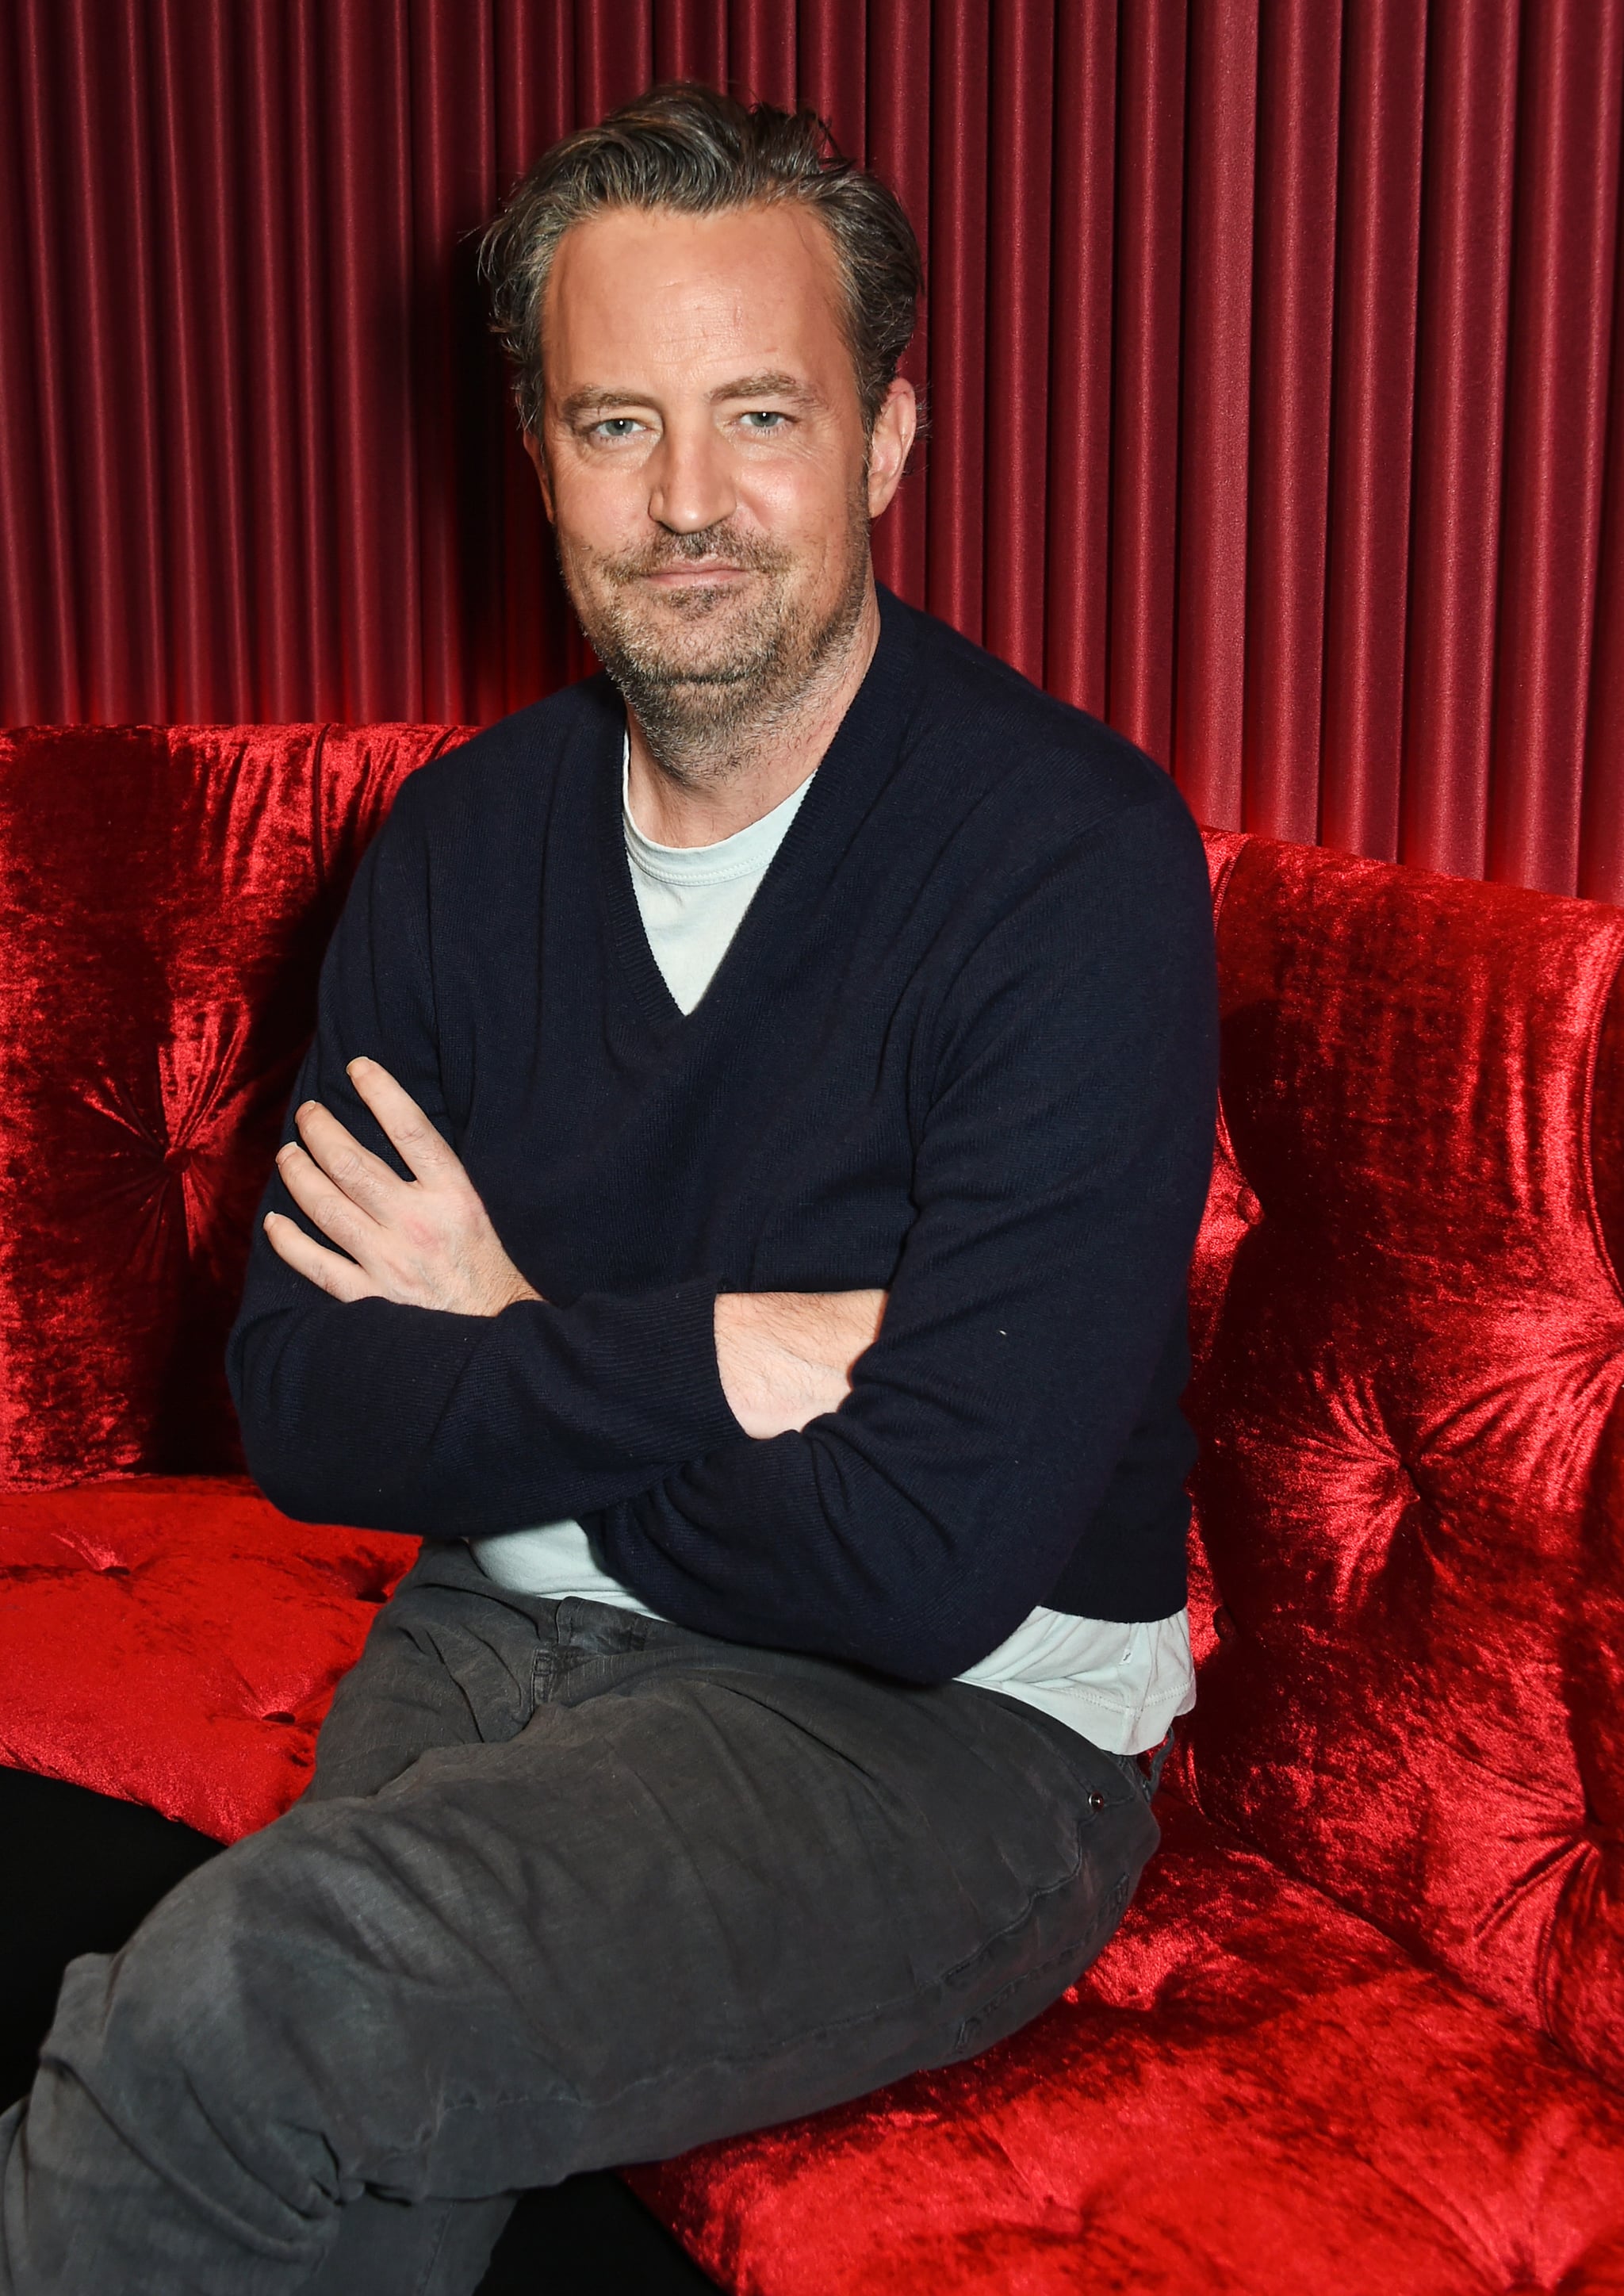 LONDON, ENGLAND - FEBRUARY 08: Matthew Perry poses at a photocall for 